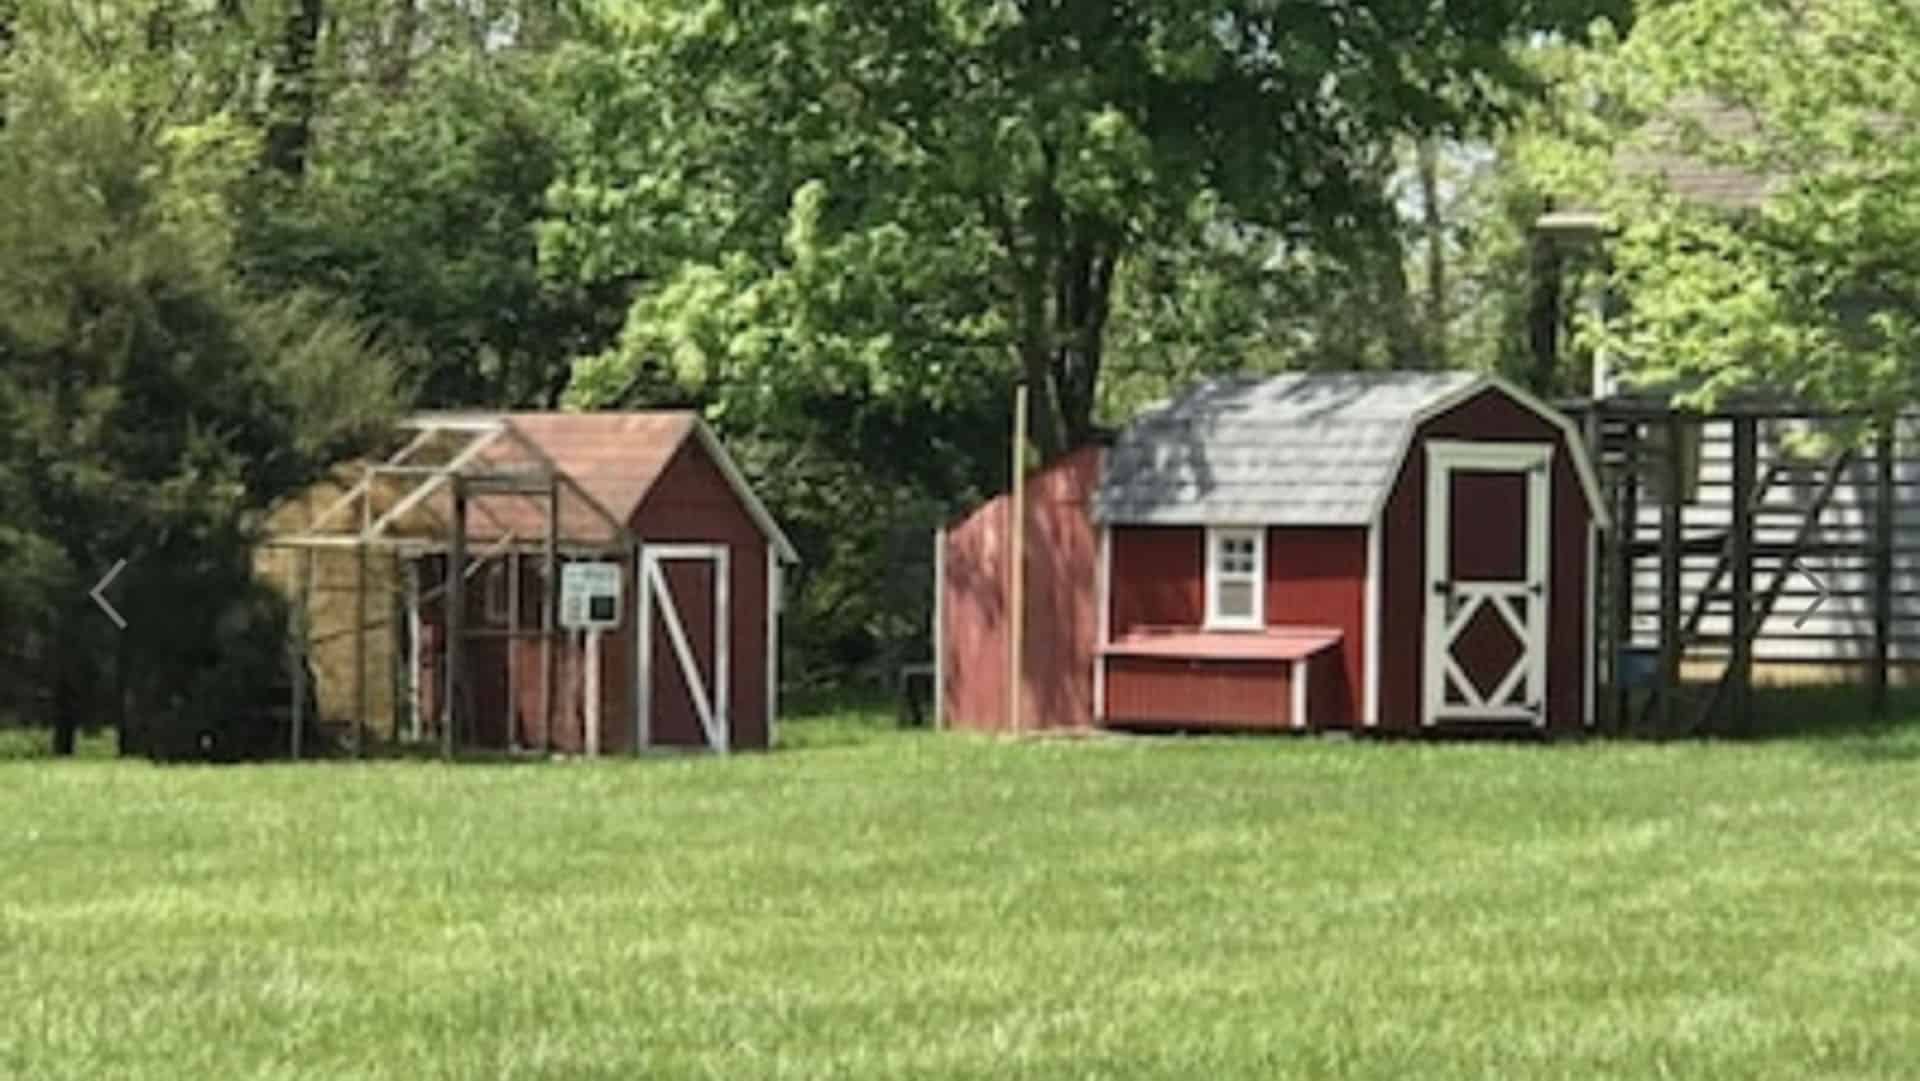 Chicken coop and storage buildings